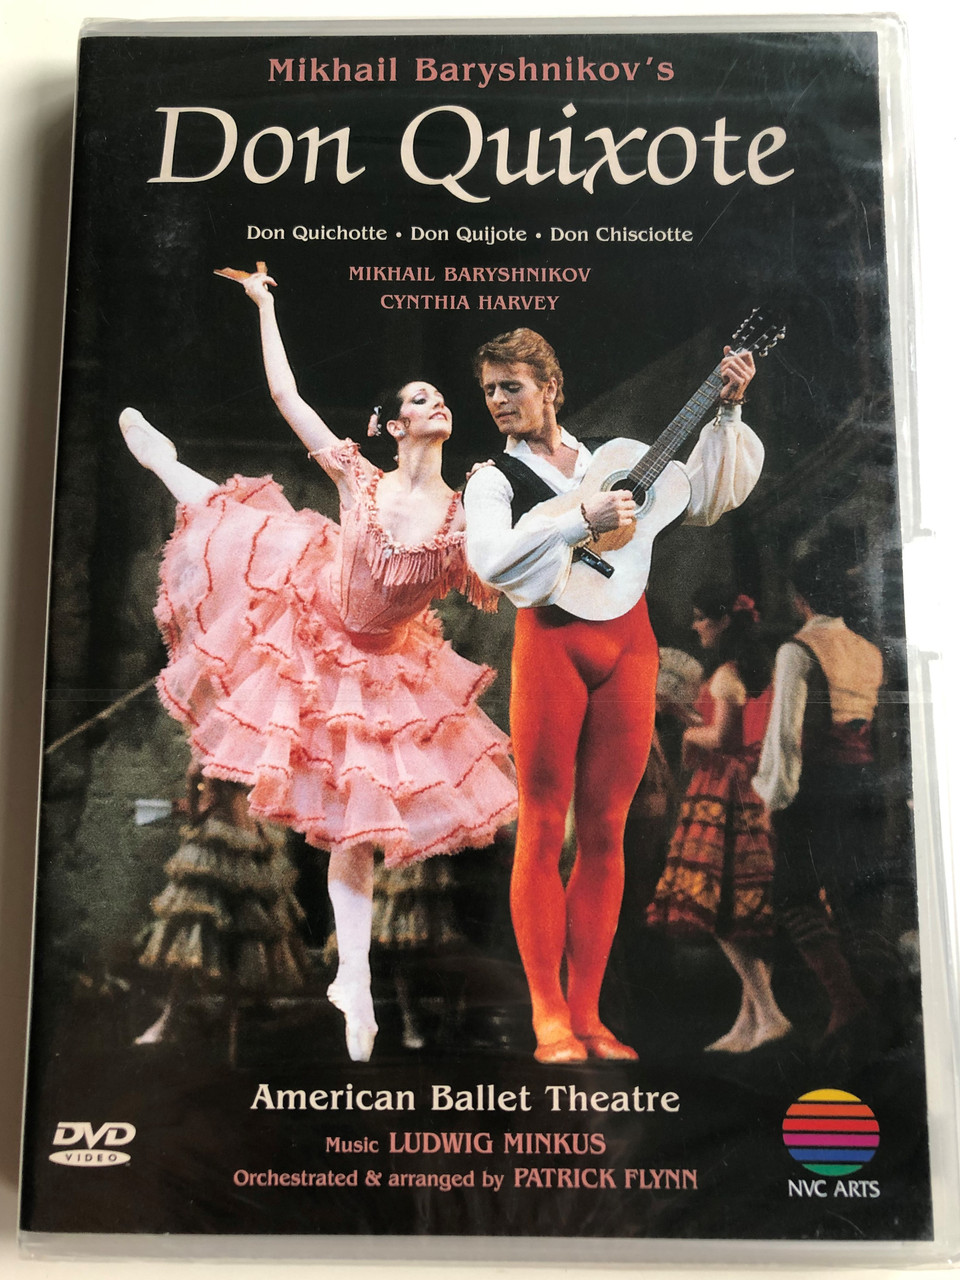 Mikhail Baryshnikov's Don Quixote DVD 1983 American Ballet Theatre /  Directed by Biran Large / Music by Ludwig Minkus / Orchestrated and  arranged by Patrick Flynn / NVC Arts - bibleinmylanguage